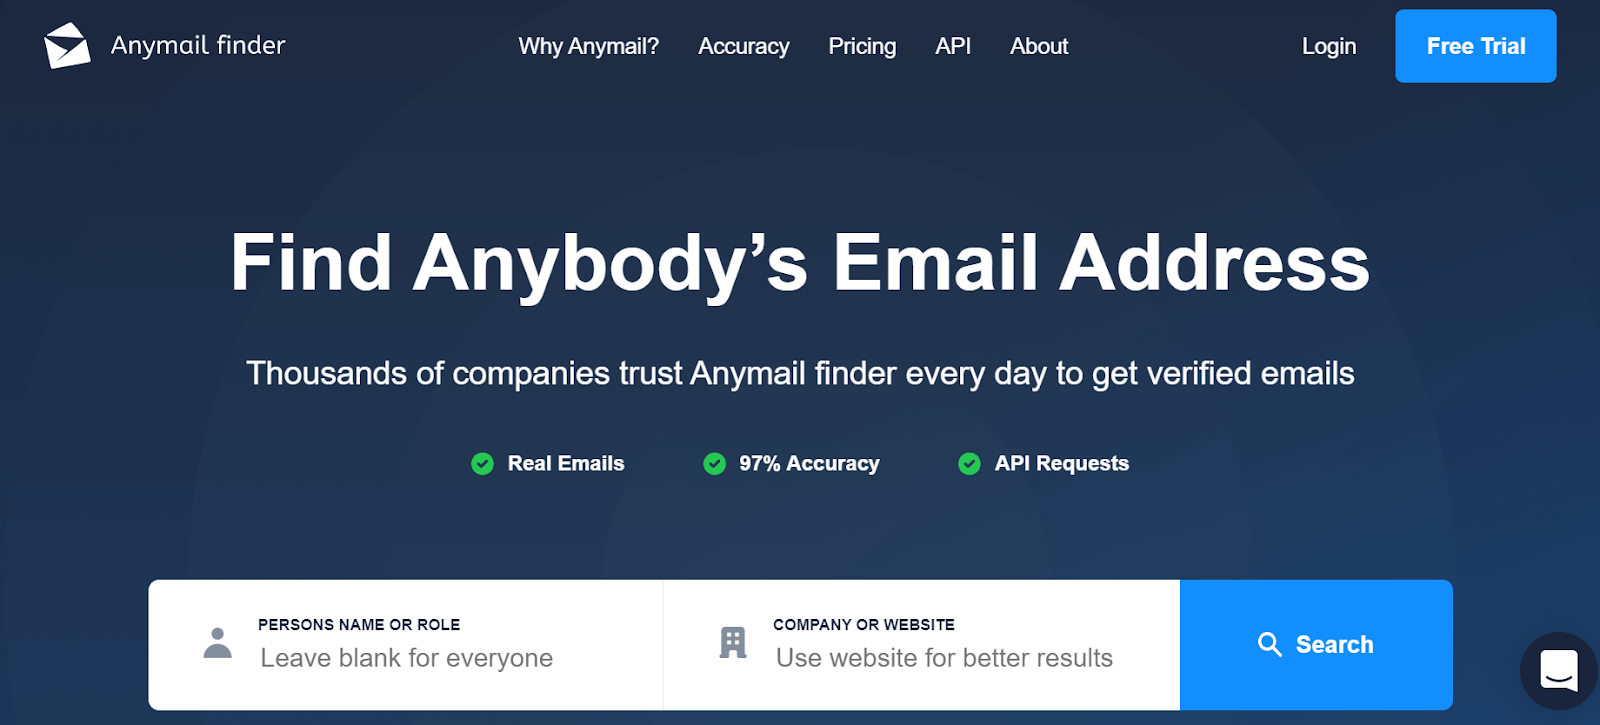 Anymail Finder homepage